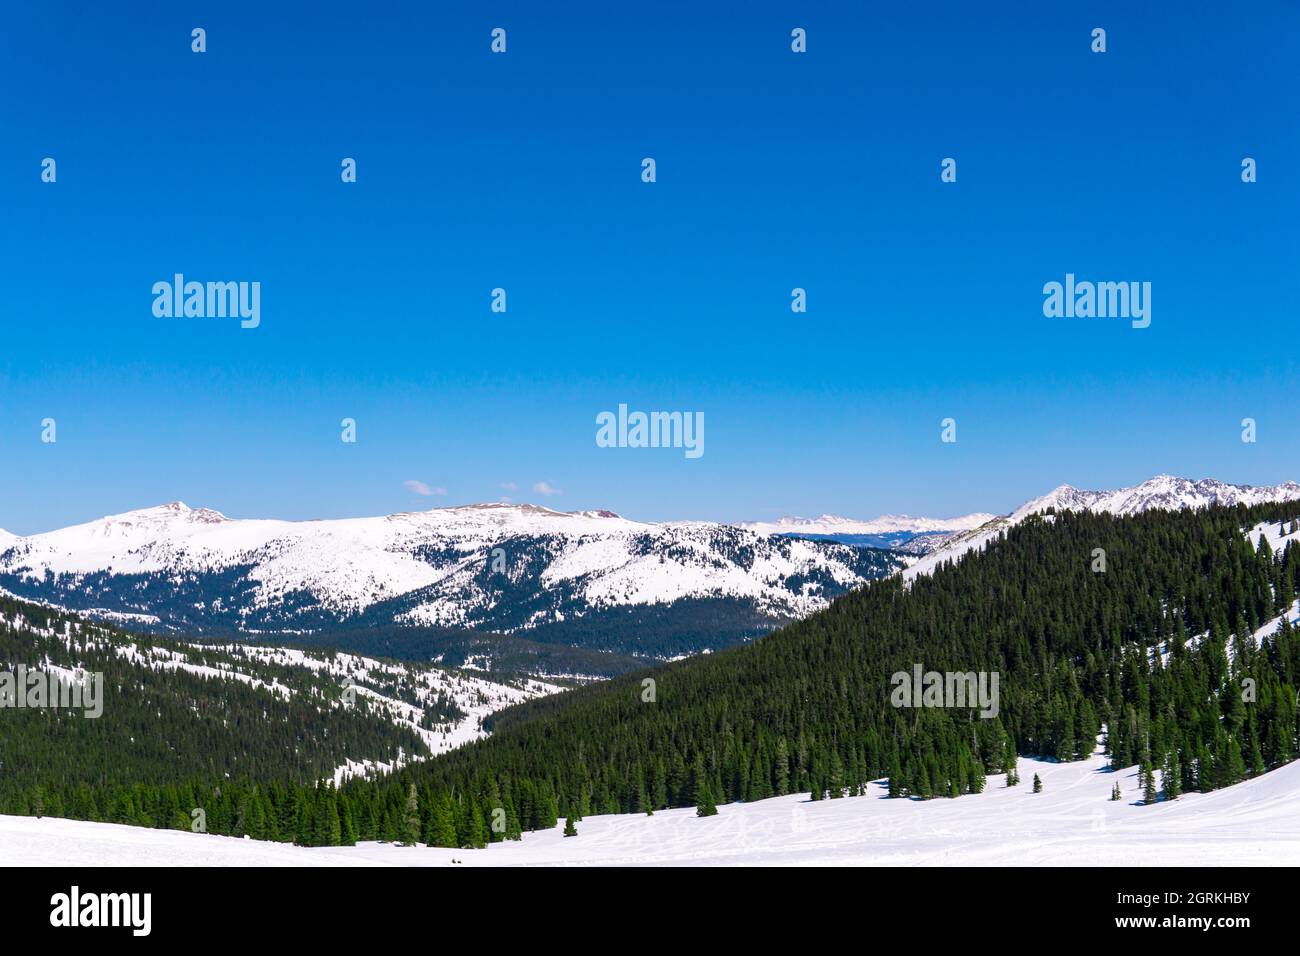 Winter Landscape Mountain Peaks With Pine Forest Stock Photo